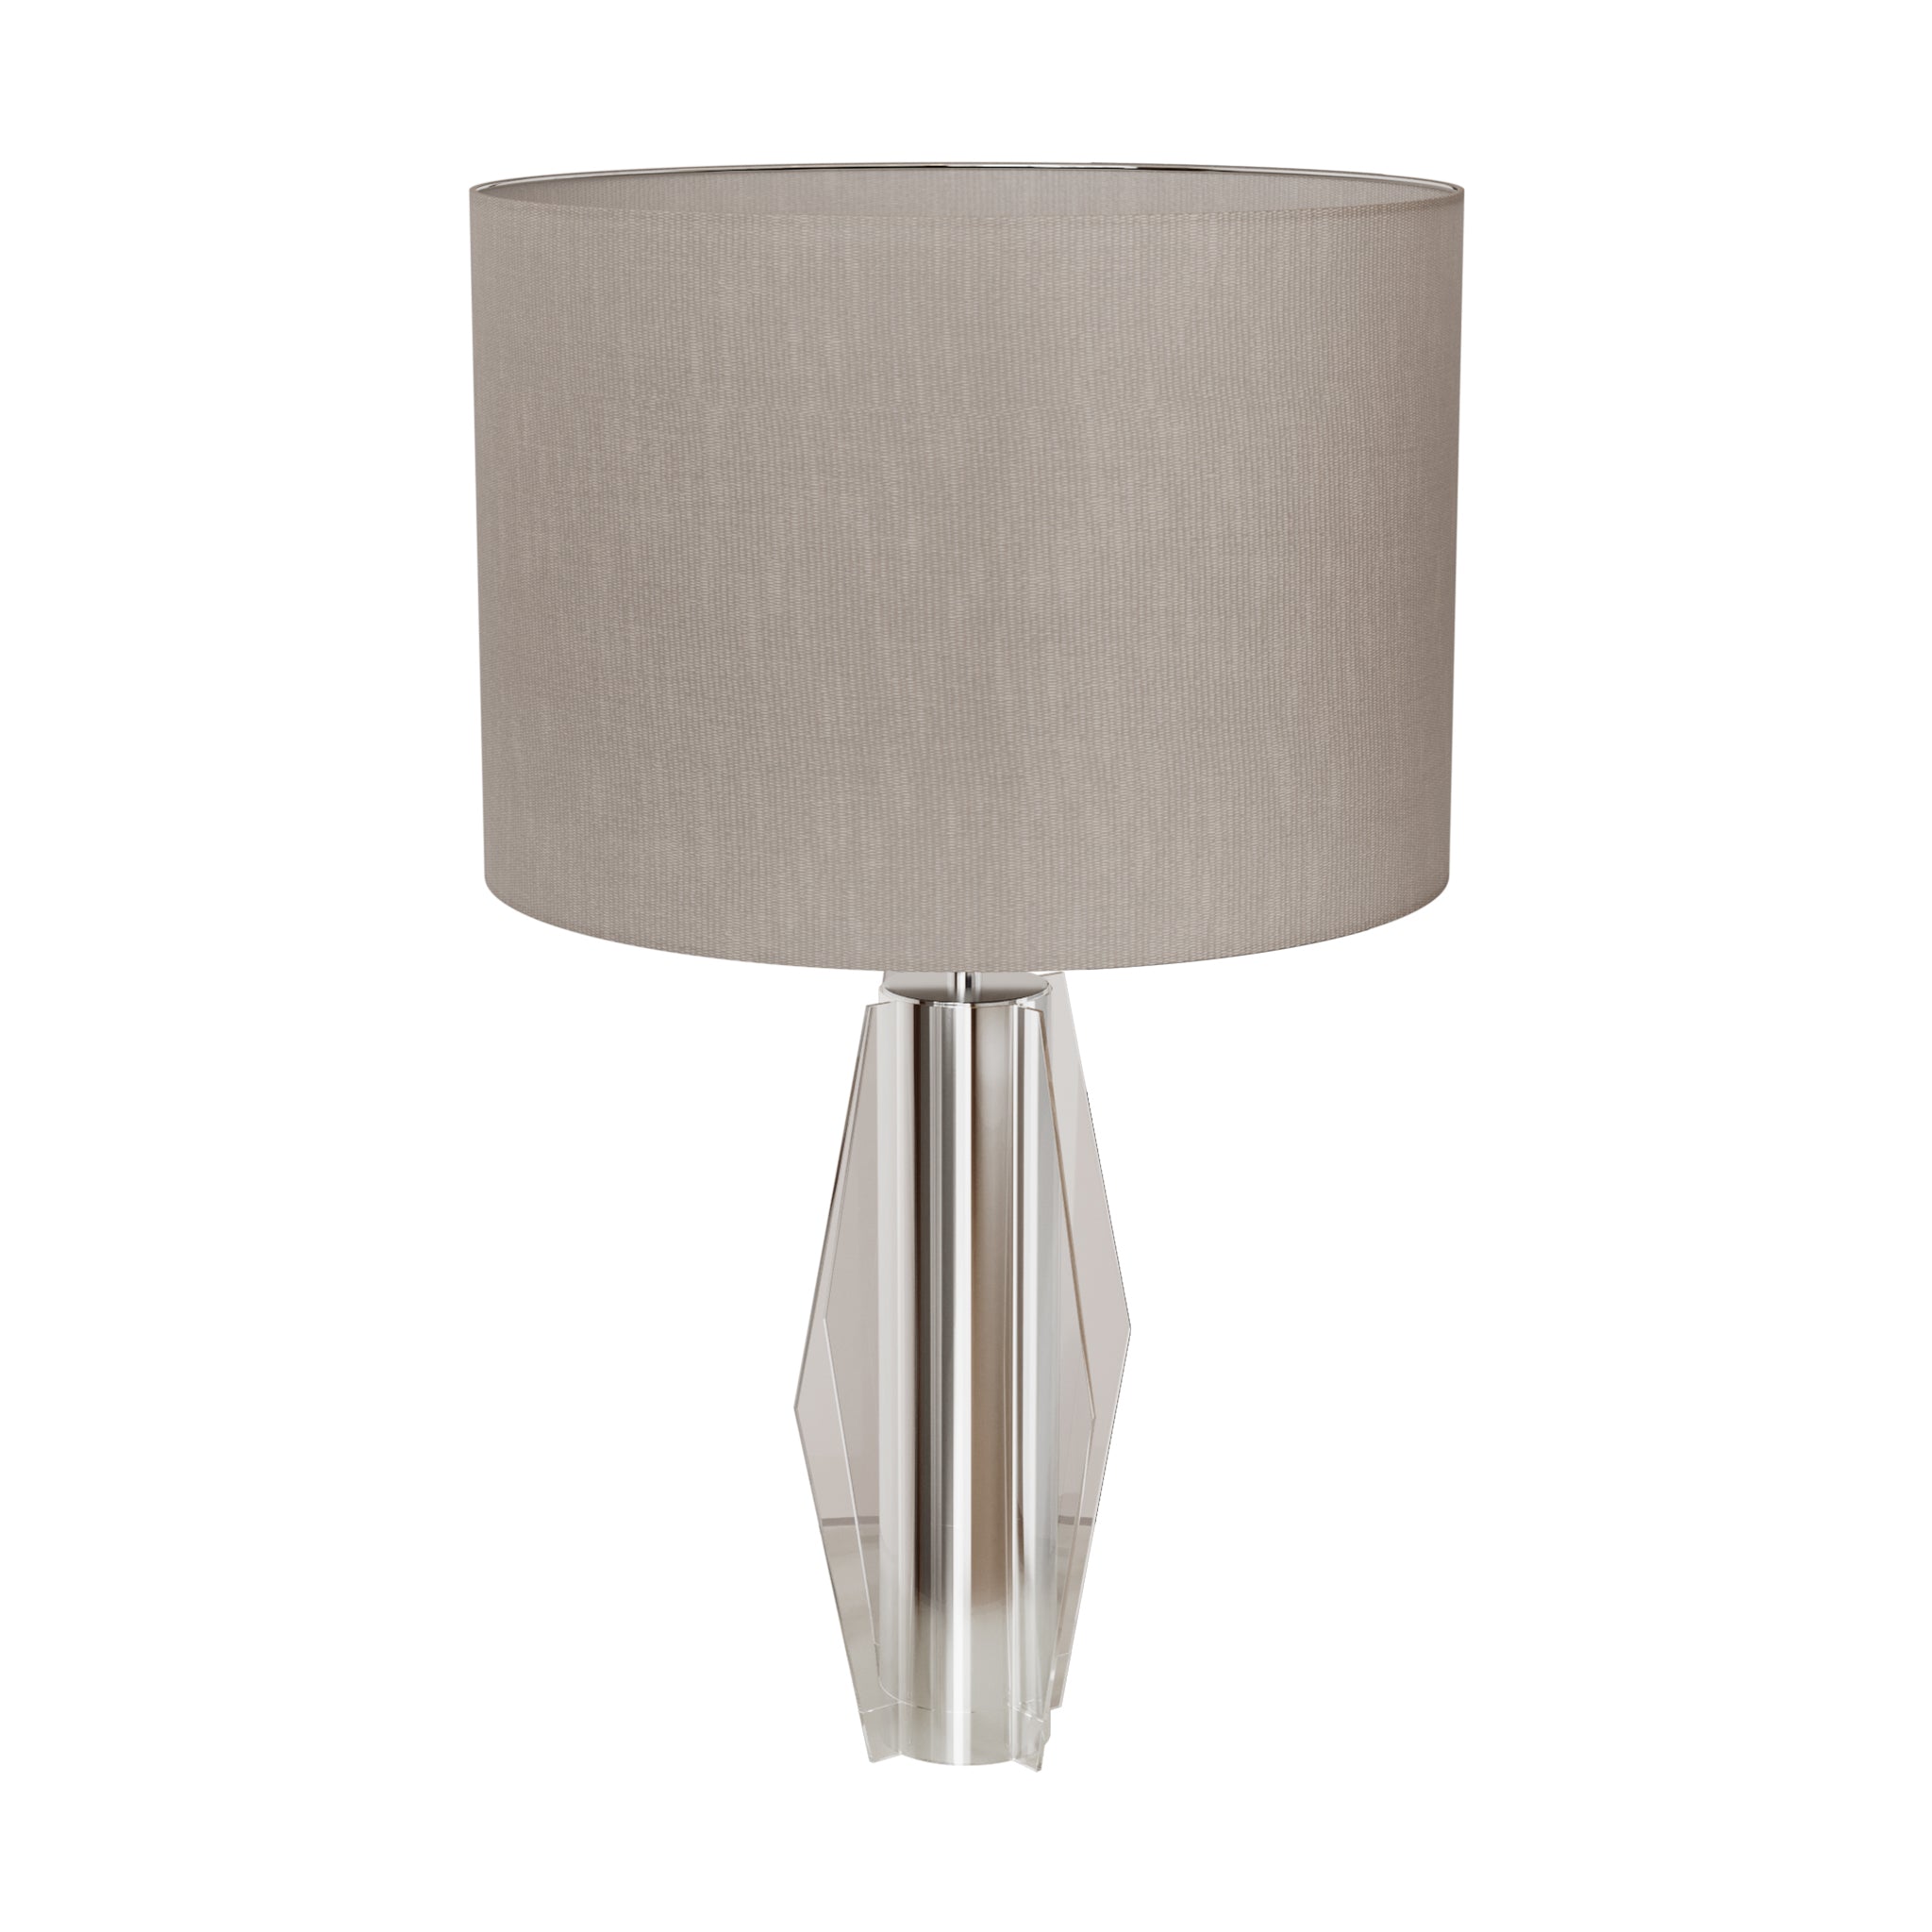 that's living prismatic geometry crystal table lamp
clear nickel table lamps 